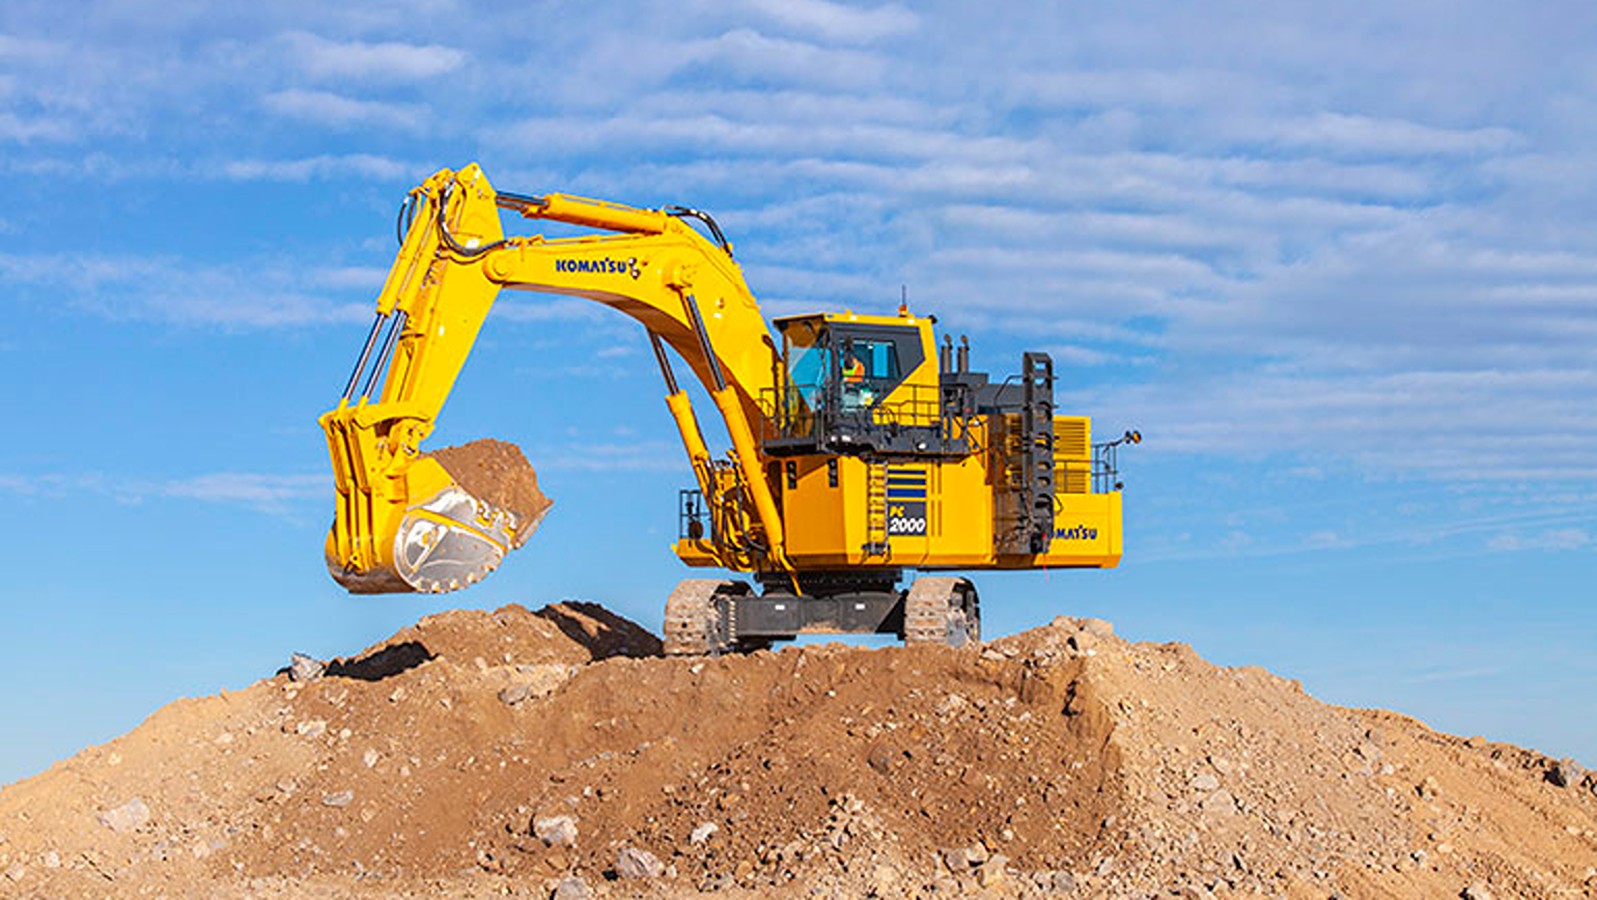 yellow hydraulic excavator on top of dirt mound